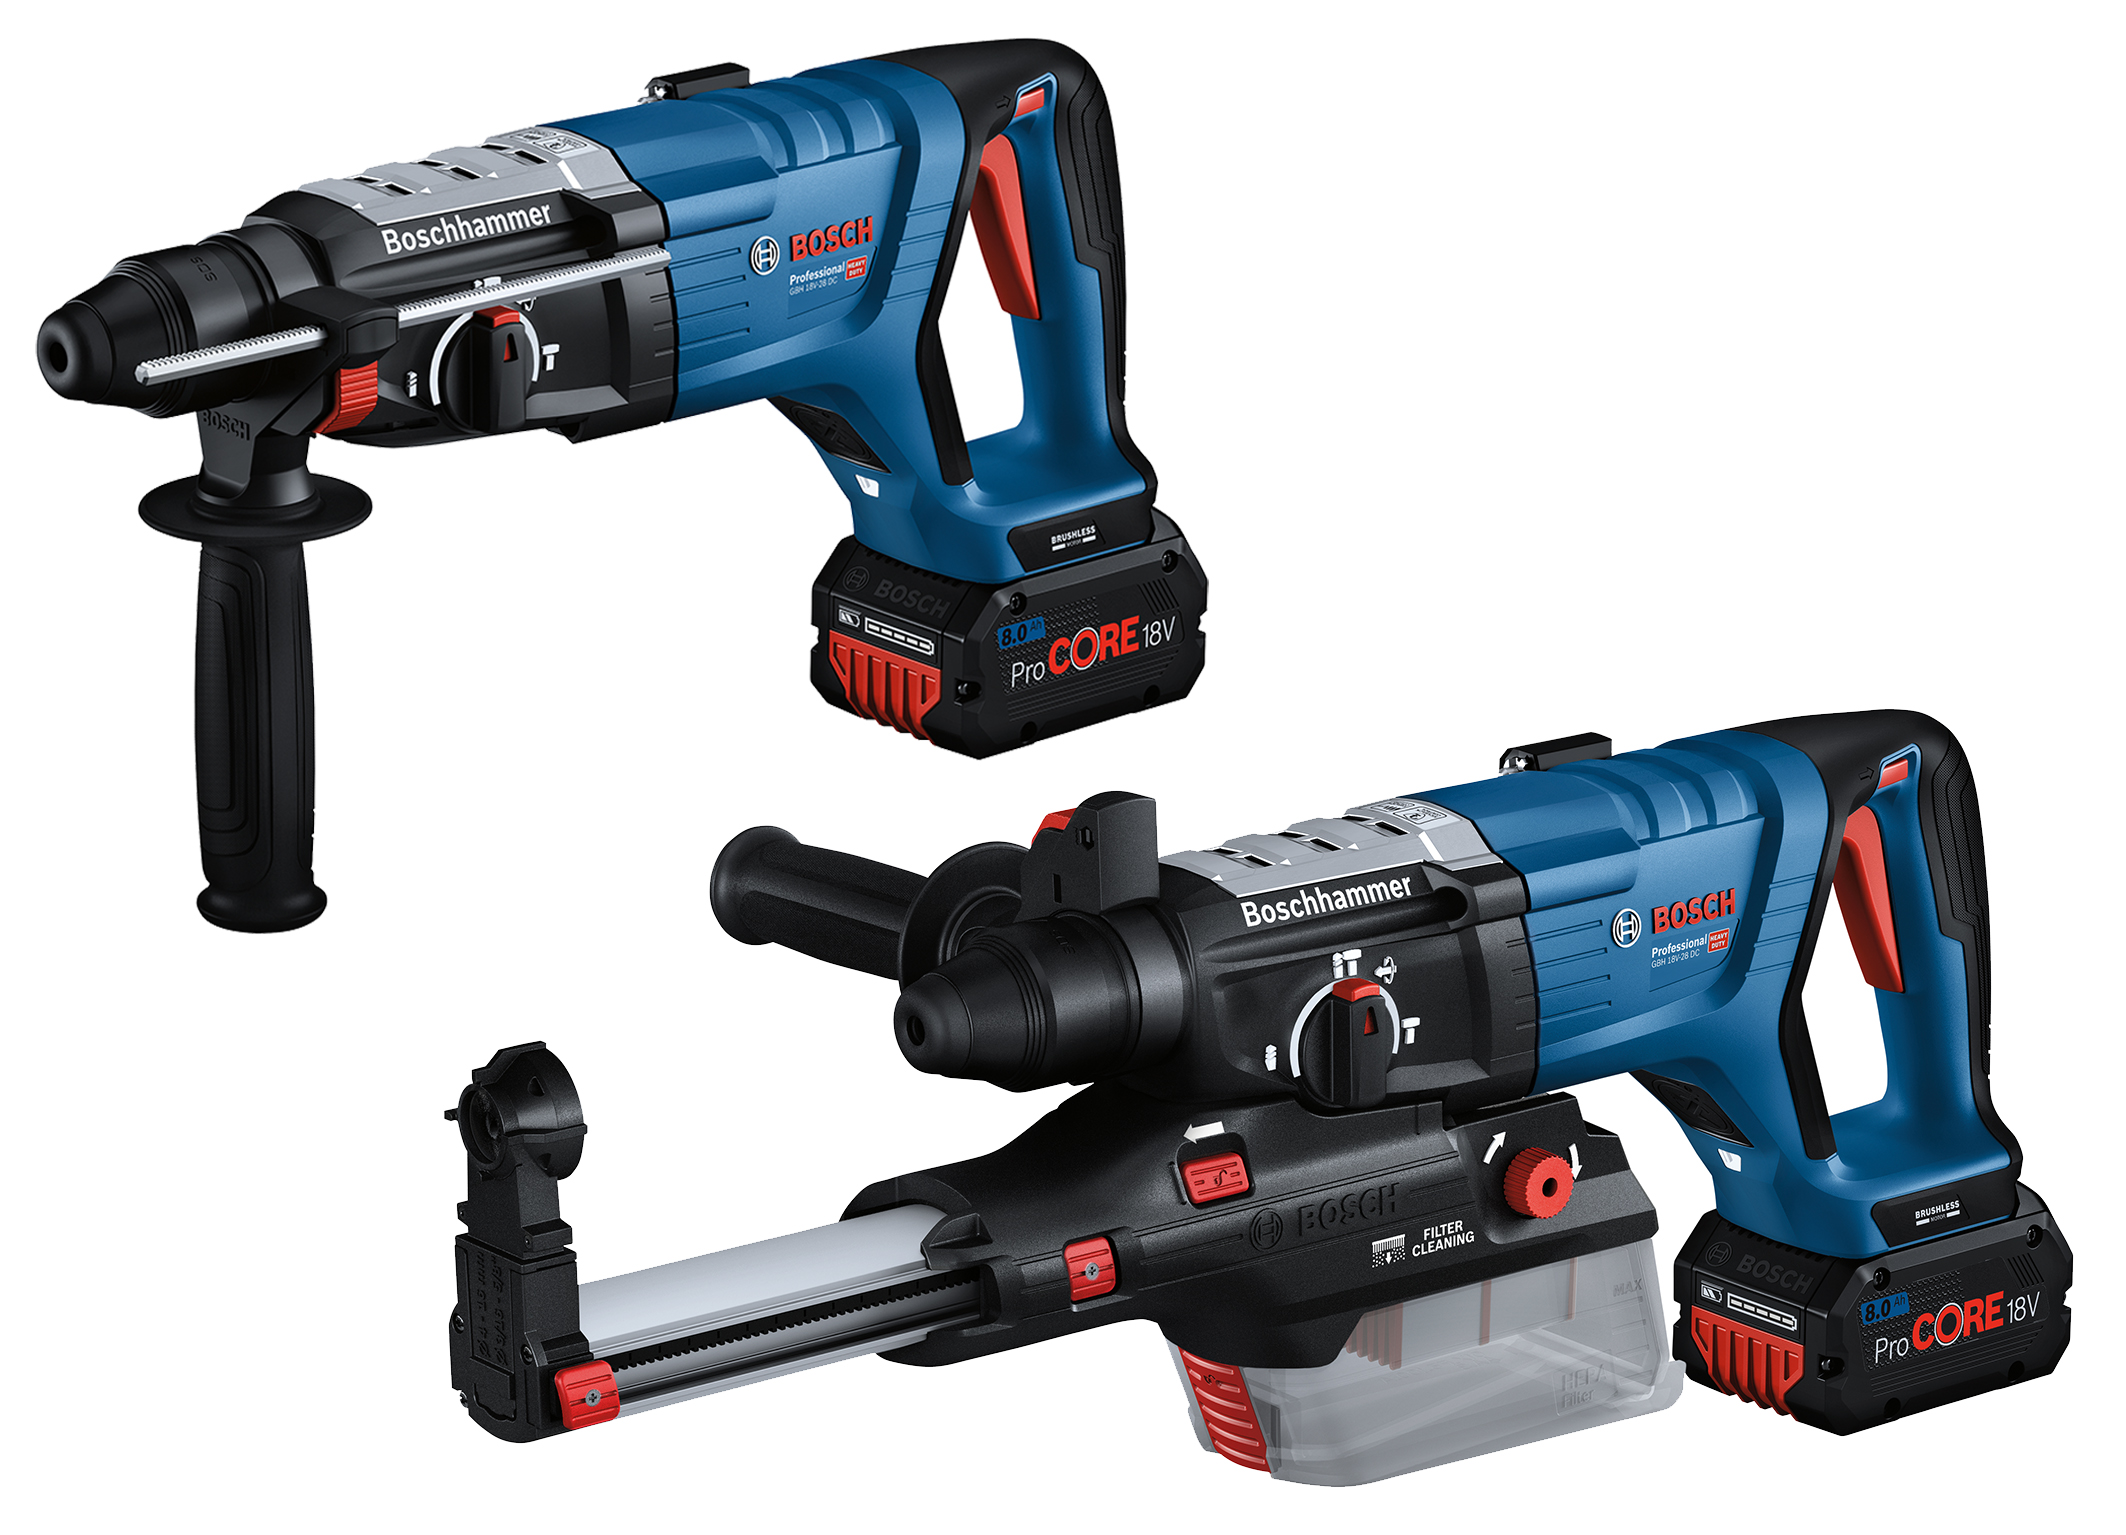 More powerful than its corded counterpart: Bosch GBH 18V-28 DC Professional 18V rotary hammer for professionals